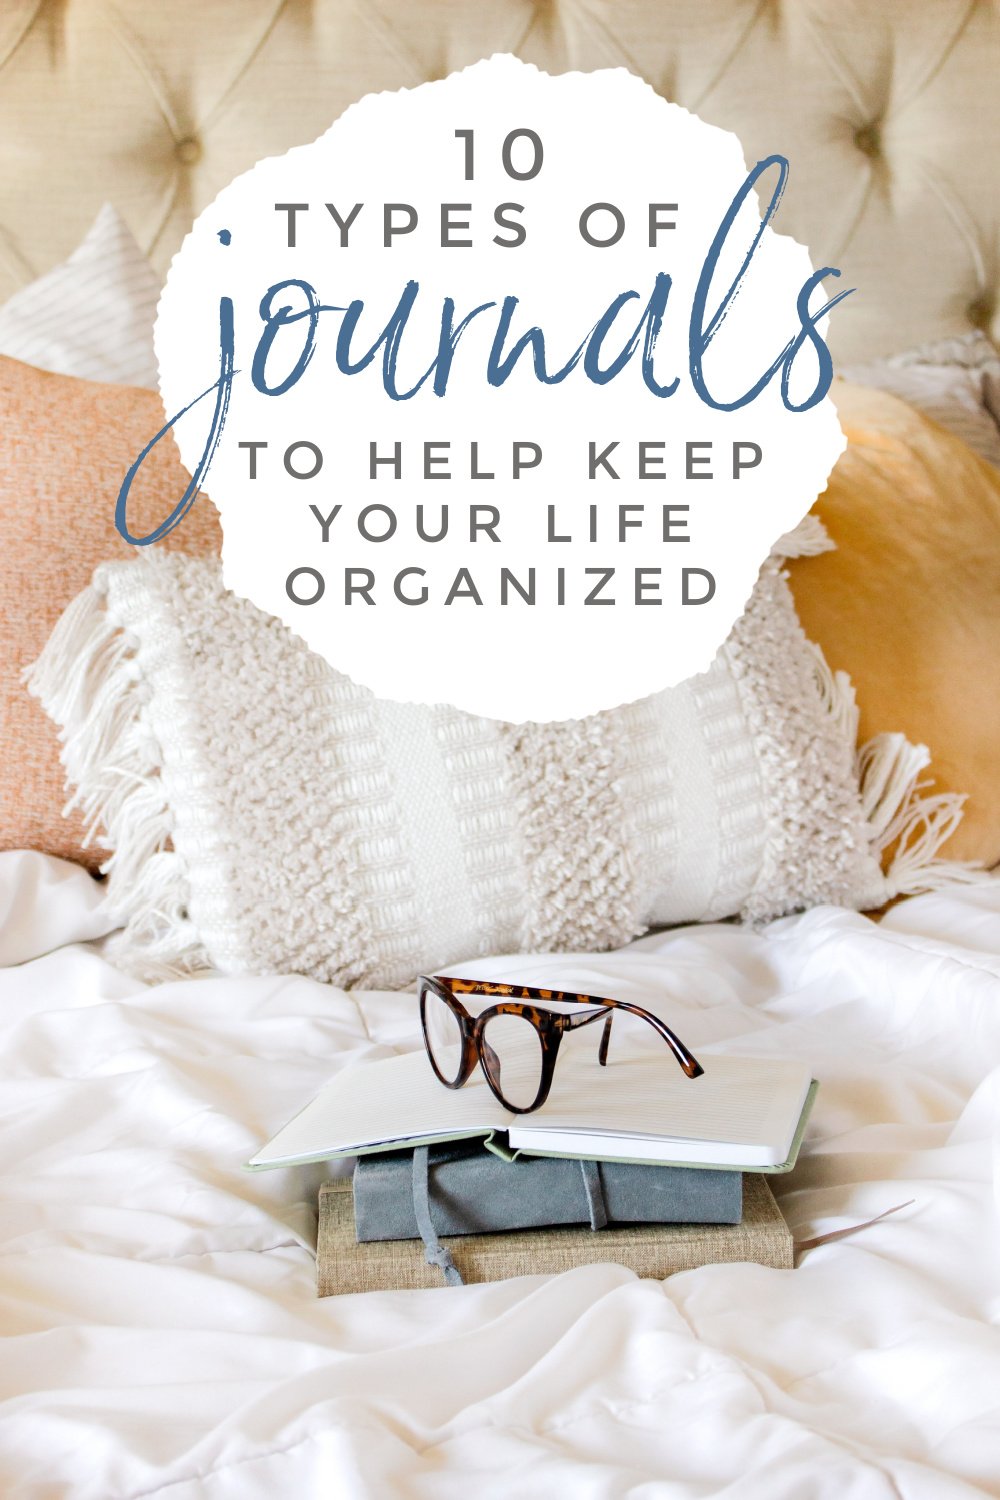 10 Types Of Journals To Help Keep Your Life Organized